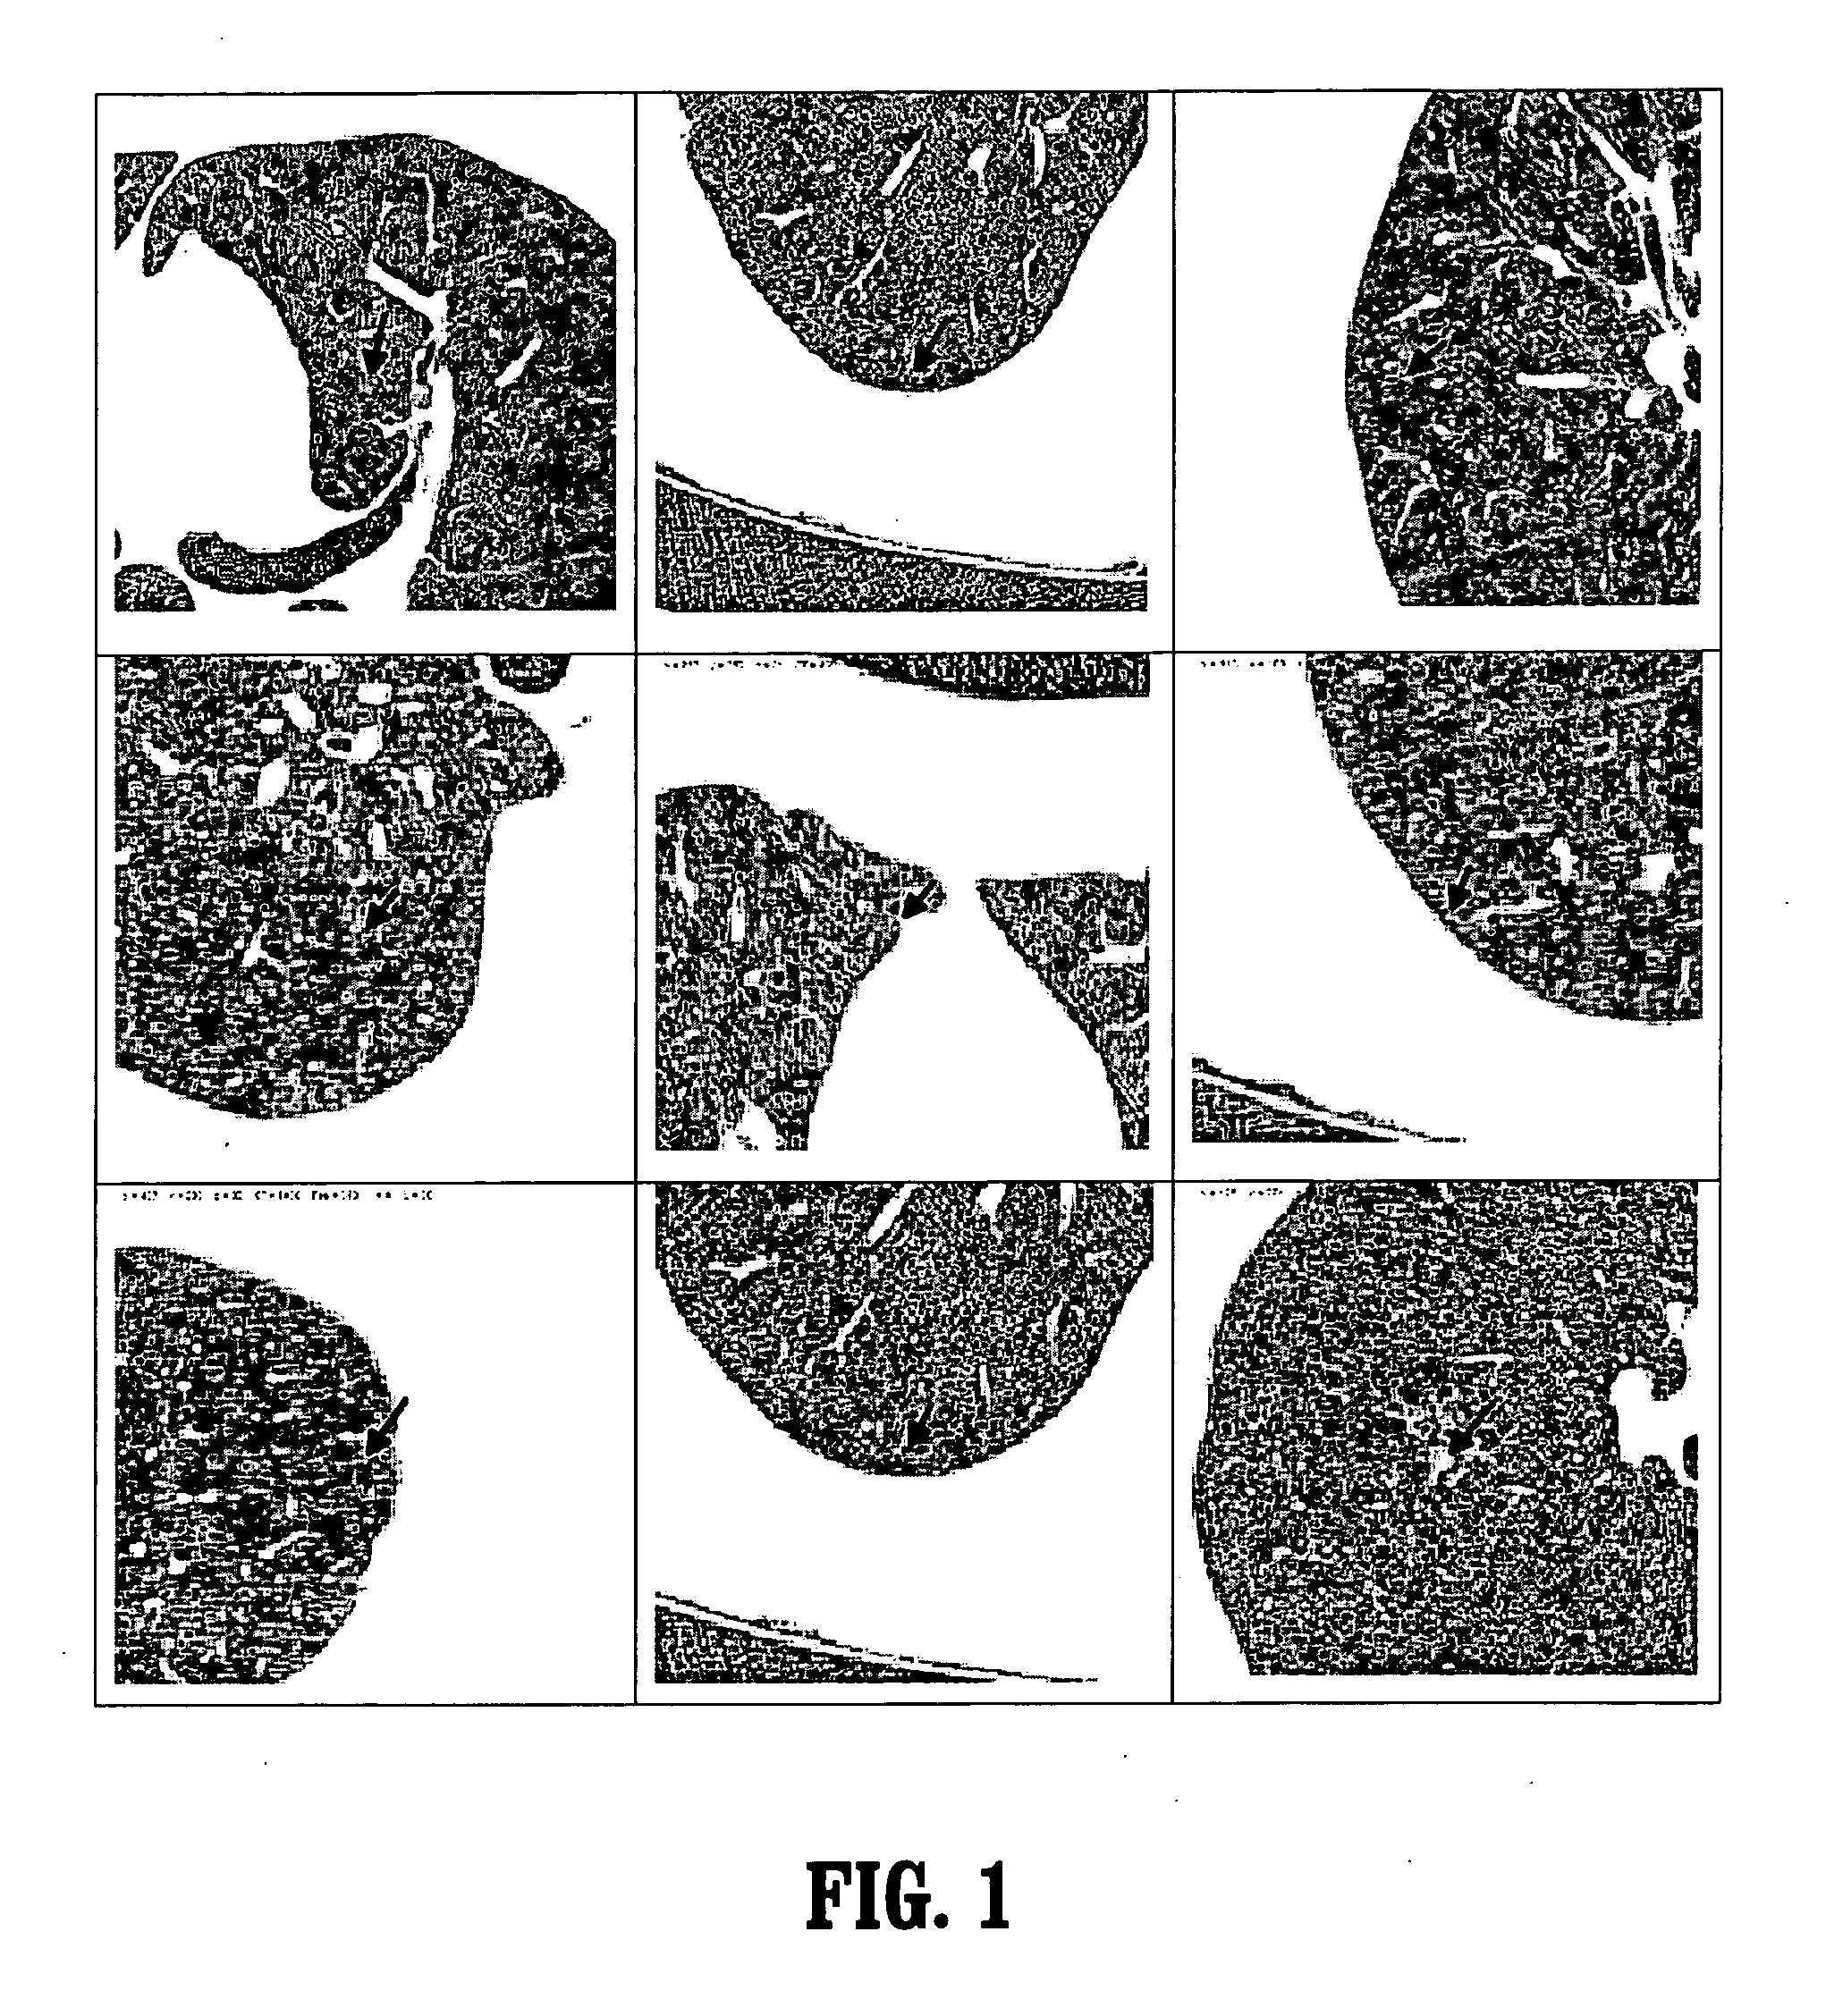 System and method for detecting ground glass nodules in medical images